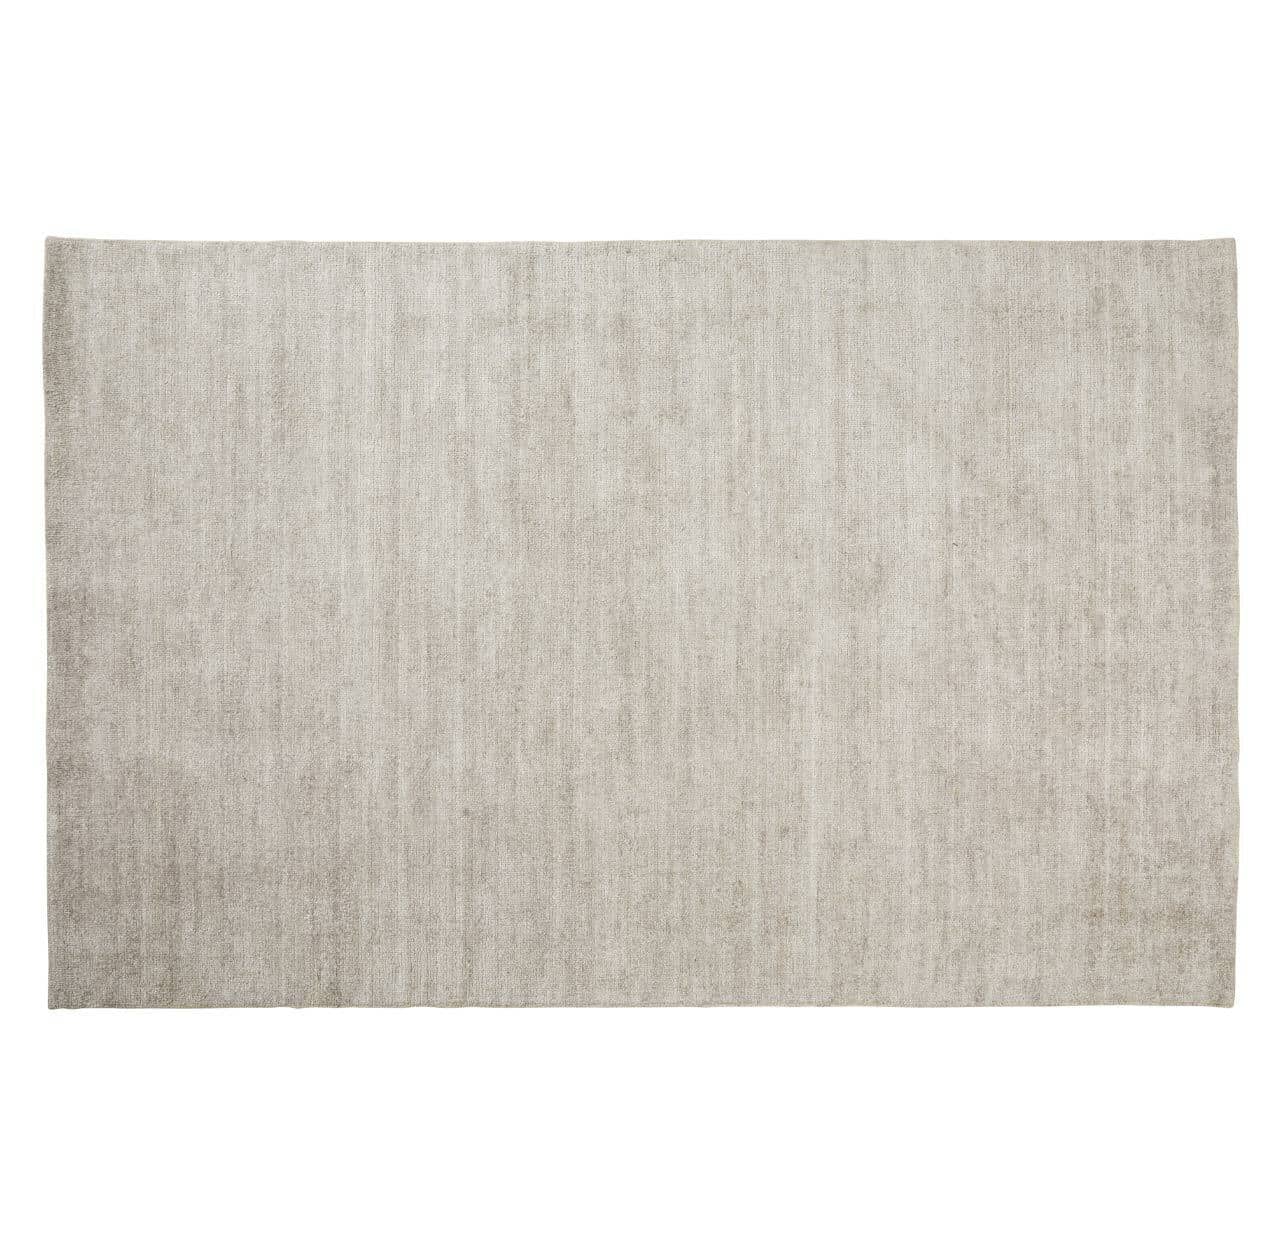 Almonte Rug - Oyster 200cm x 300cm